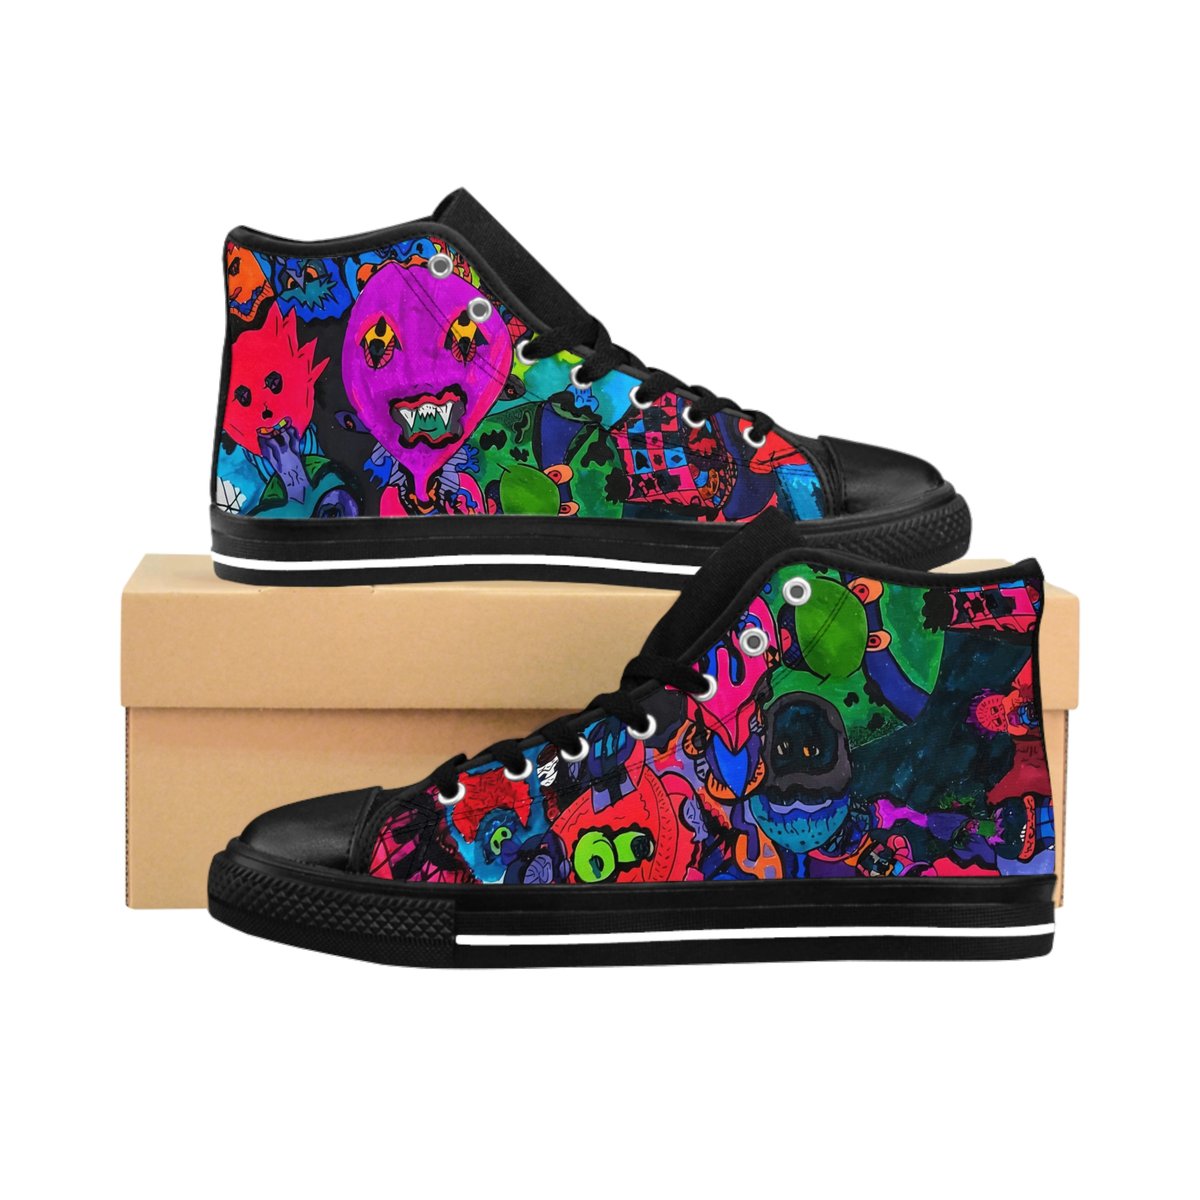 Step up your shoe game with NuMetalZ! These high-top sneakers feature the wild ink hand drawings of artist Metal, making them a must-have for anyone looking to make a statement. Order now at savecoop.com/brands/numetalz and express yourself in style! #NuMetalZ #MetalArt #UniqueFashion